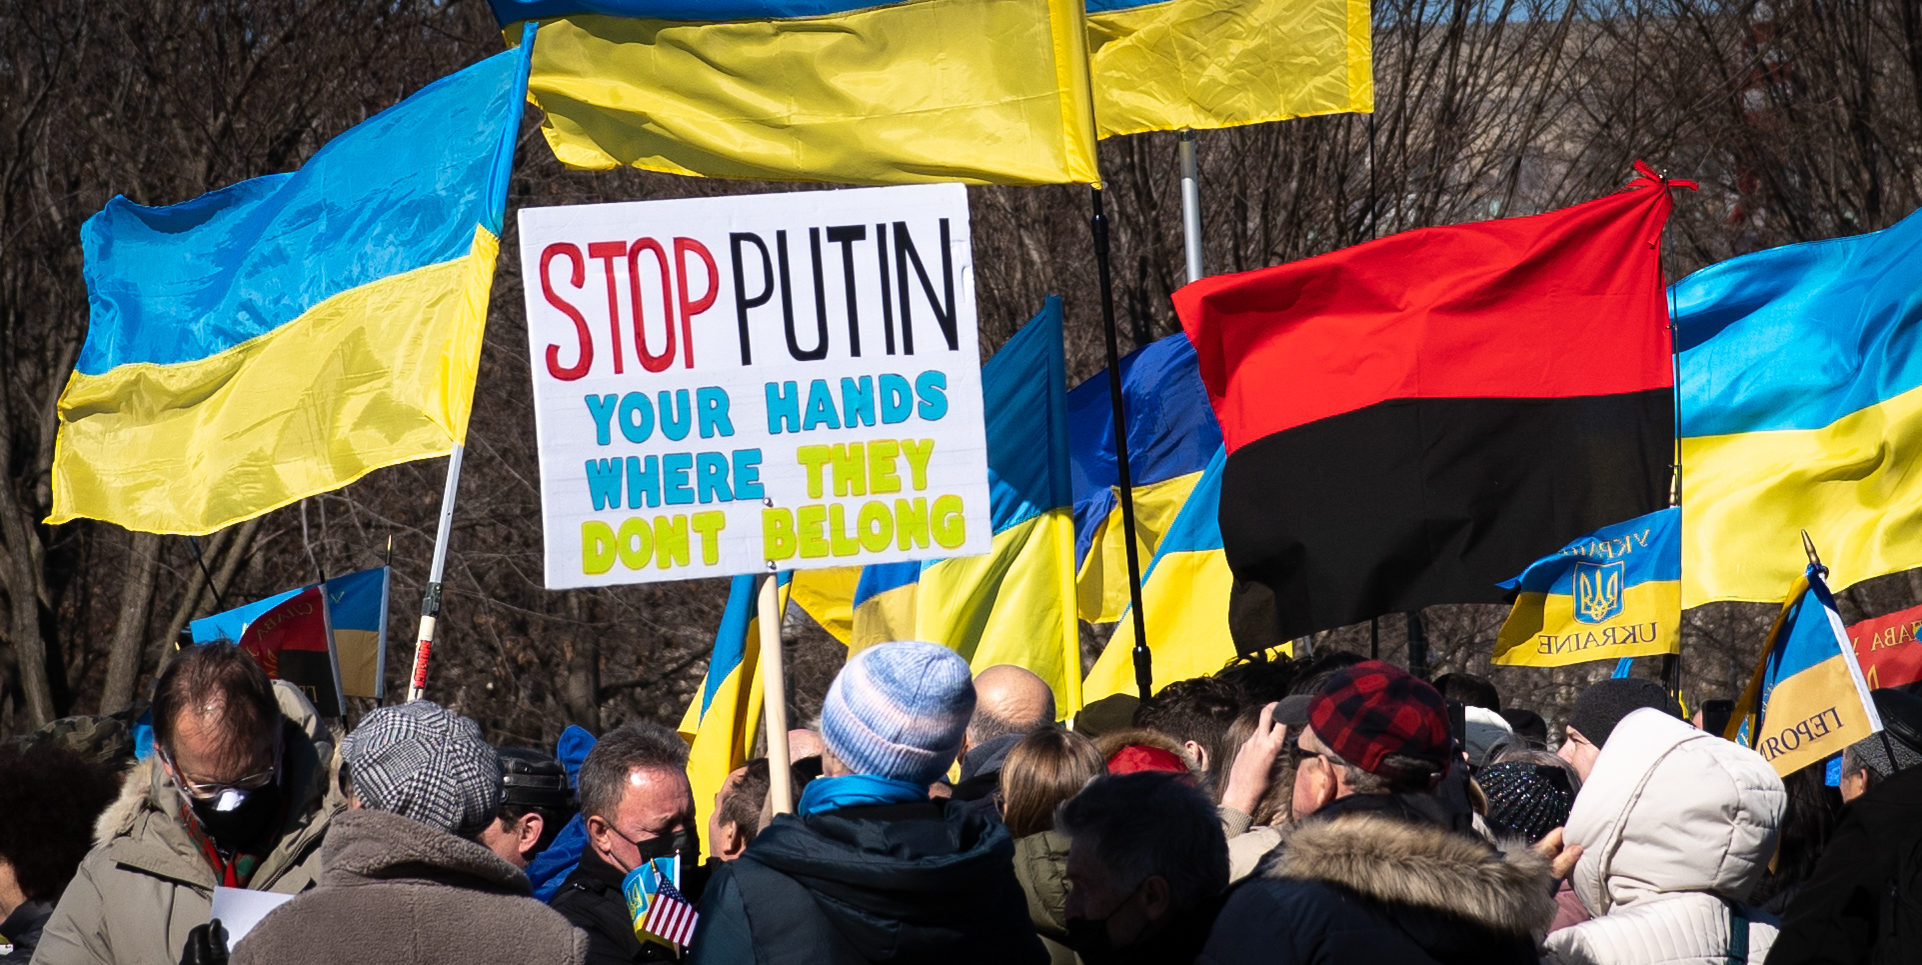 Rally against war in Ukraine with flags and sign reading "Stop Putin your hands where they don't belong"